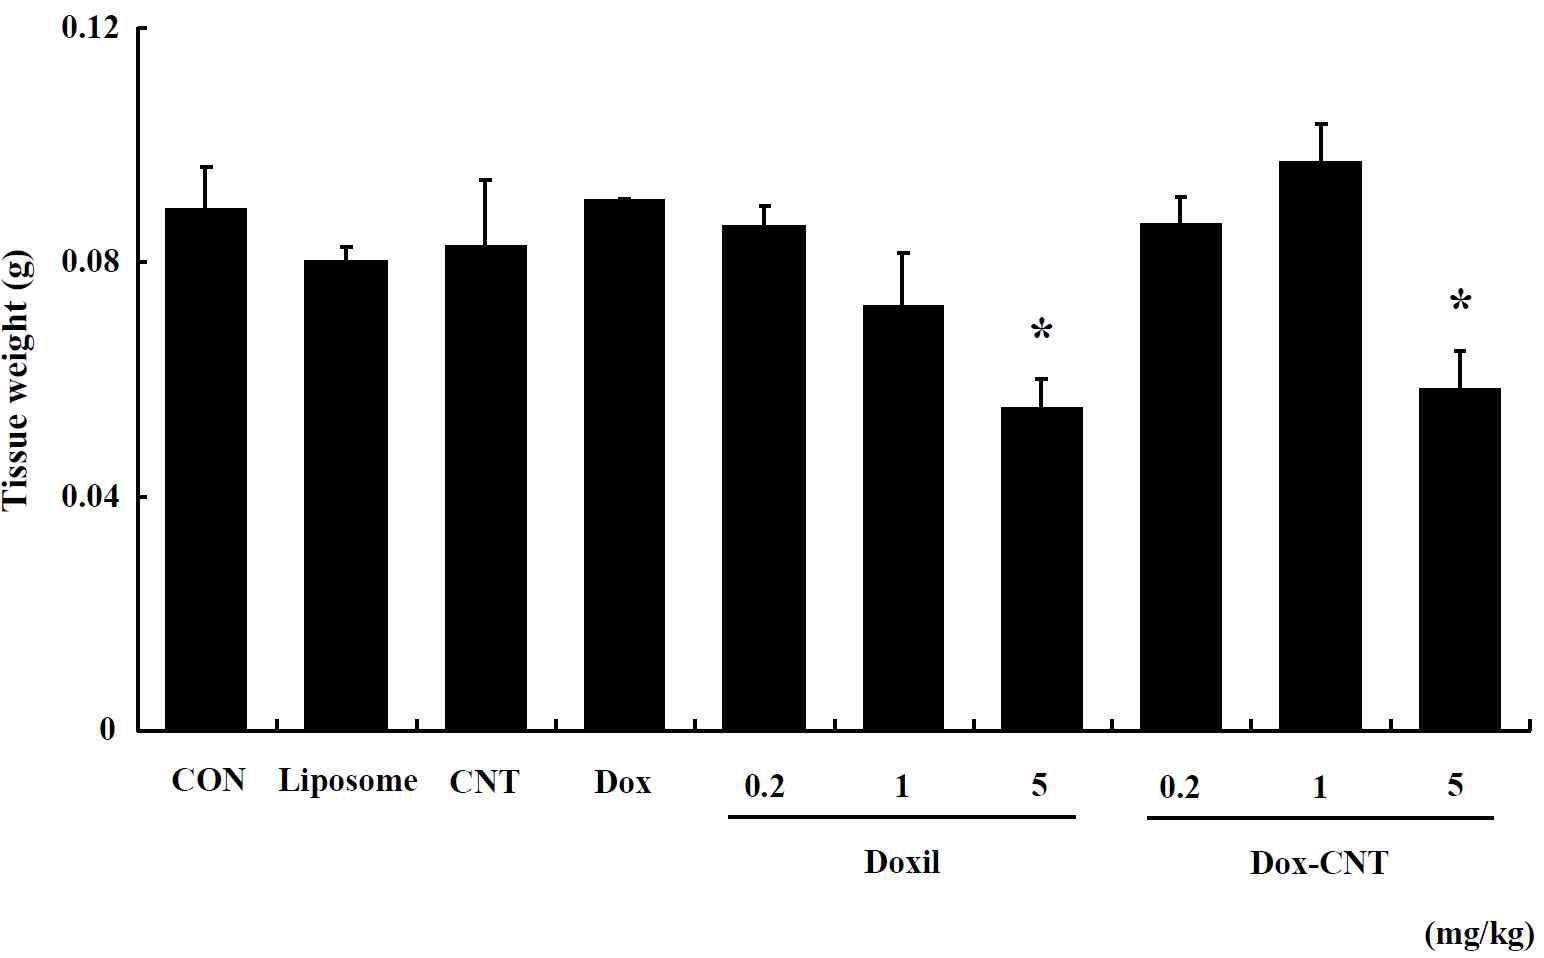 The change of thymus weight in single exposed male ICR mice for 14 days. Mice were respectively administered by intravenous injection with liposome, CNT, Dox, Doxil (0.2, 1, 5 mg/kg) and Dox-CNT (0.2, 1, 5 mg/kg). The results are presented as mean ± SE (n = 10). * p < 0.05, significantly different from the control.